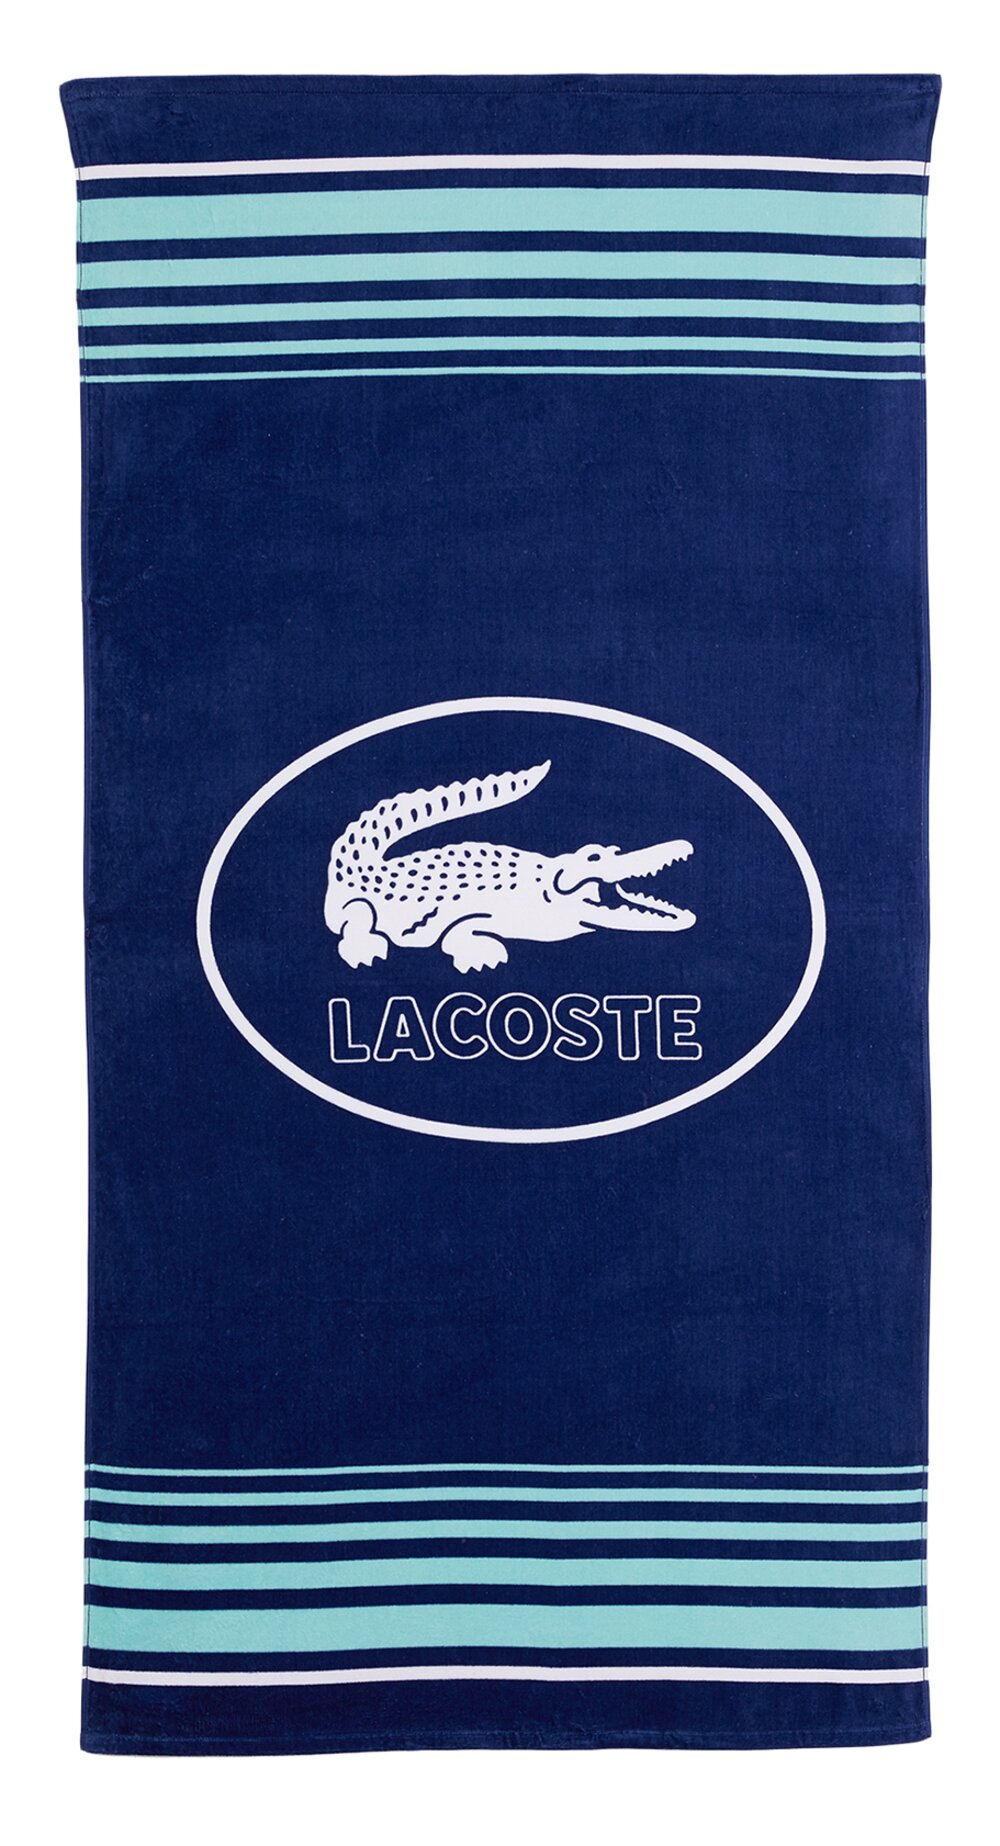 LACOSTE BEACH TOWEL WITH SMALL ALLIGATORS 36X72 INCHES 